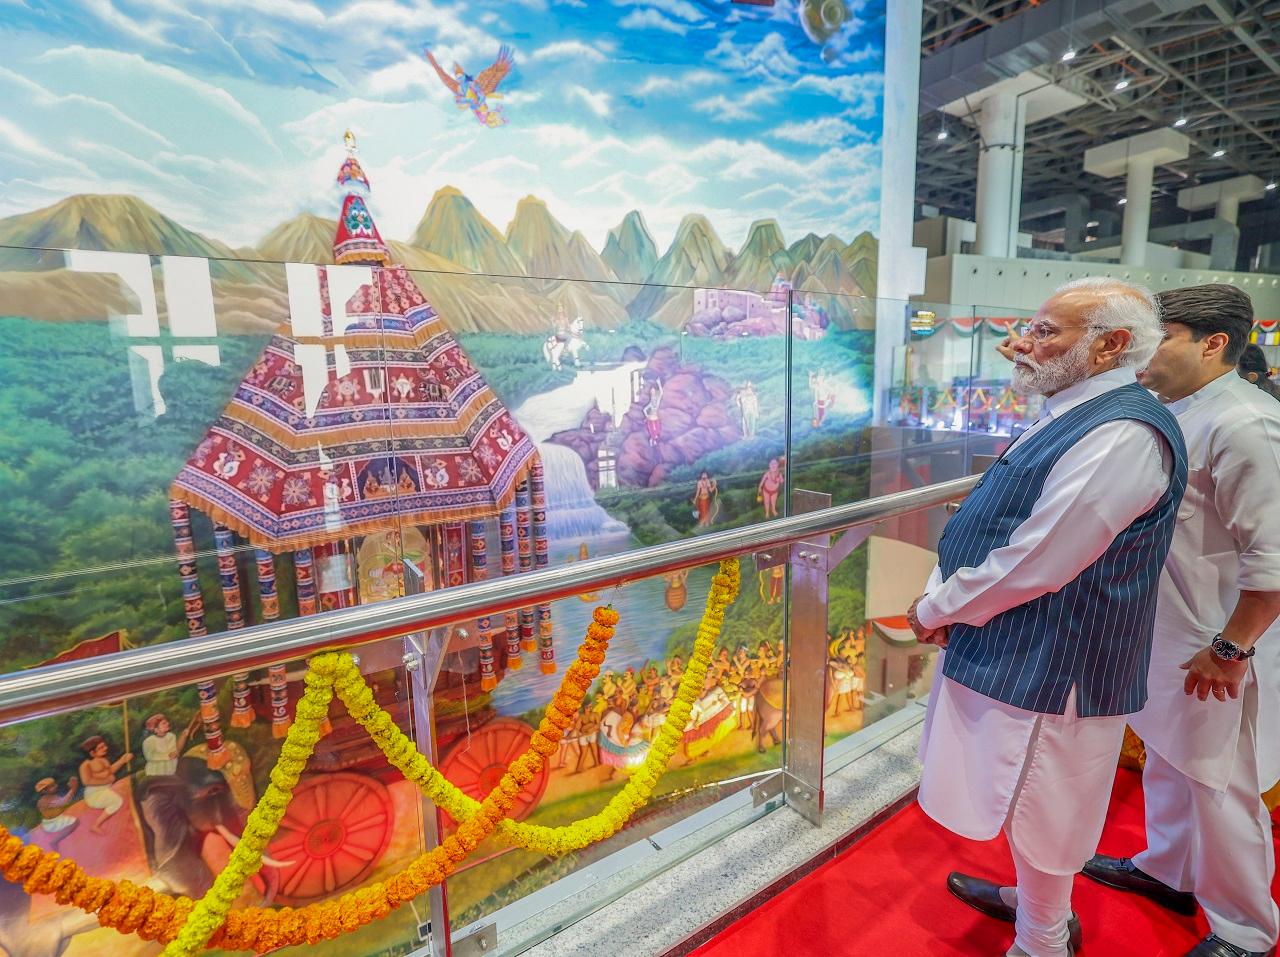 The new terminal building has been developed at a cost of more than Rs 1100 crore. The two-level new international terminal has the capacity to serve more than 44 lakh passengers annually and about 3,500 during peak hours, the Prime Minister's Office (PMO) informed earlier through an official release